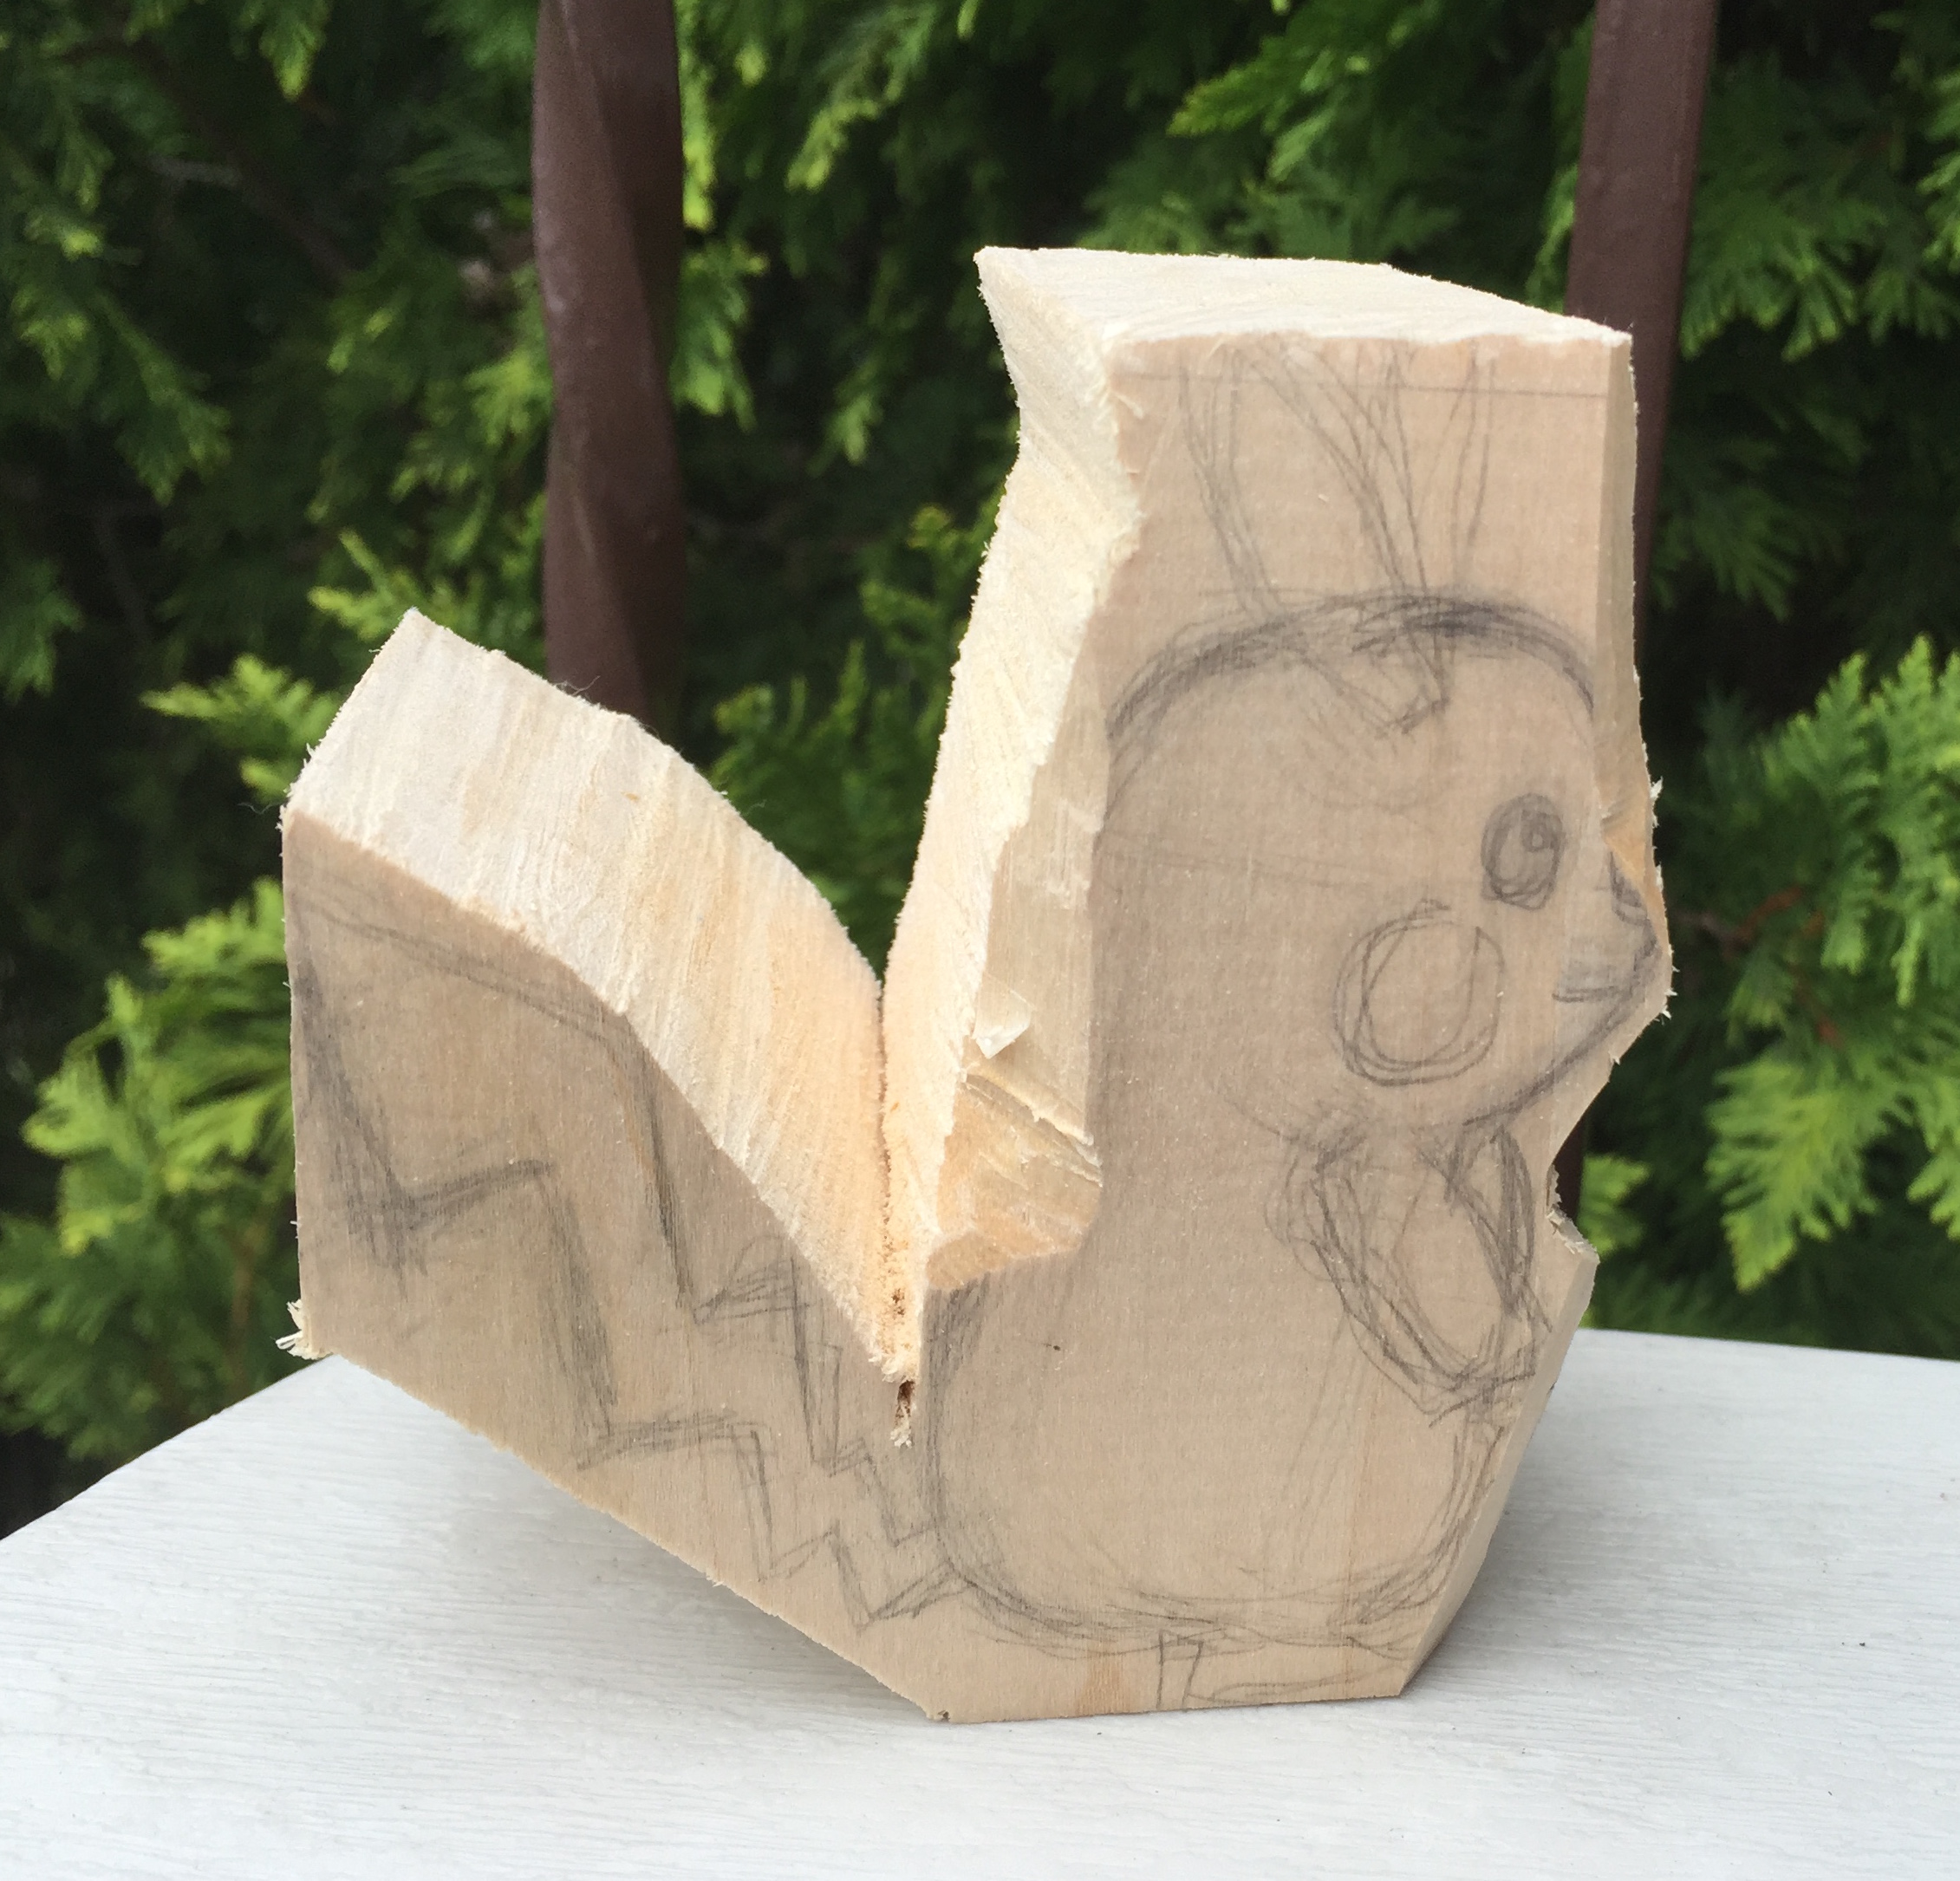 A beginner's woodcarving journey – Part 2